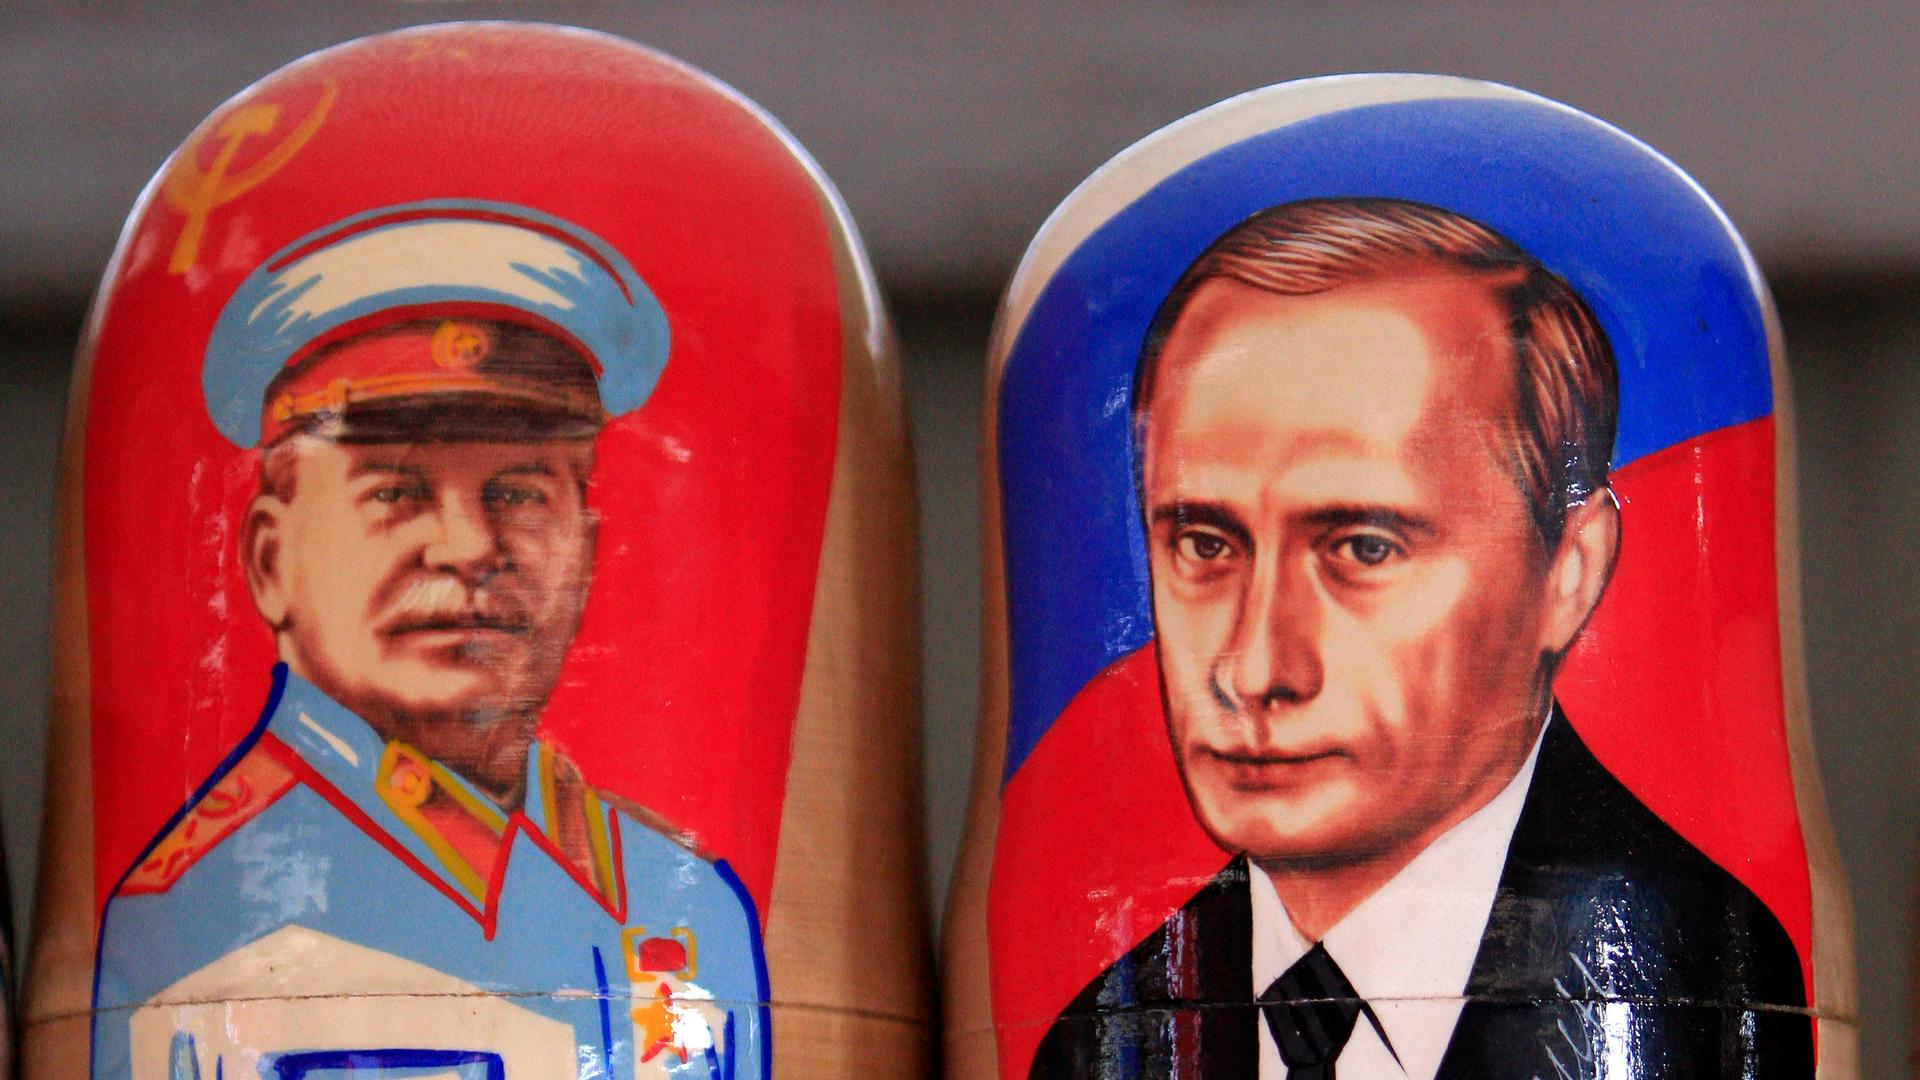 Traditional Matryoshka dolls or Russian nesting dolls bearing the faces of Russia's president elect and current Prime Minister Vladimir Putin and former Soviet dictator Josef Stalin are seen in a souvenir shop in Kiev March 5, 2012. 